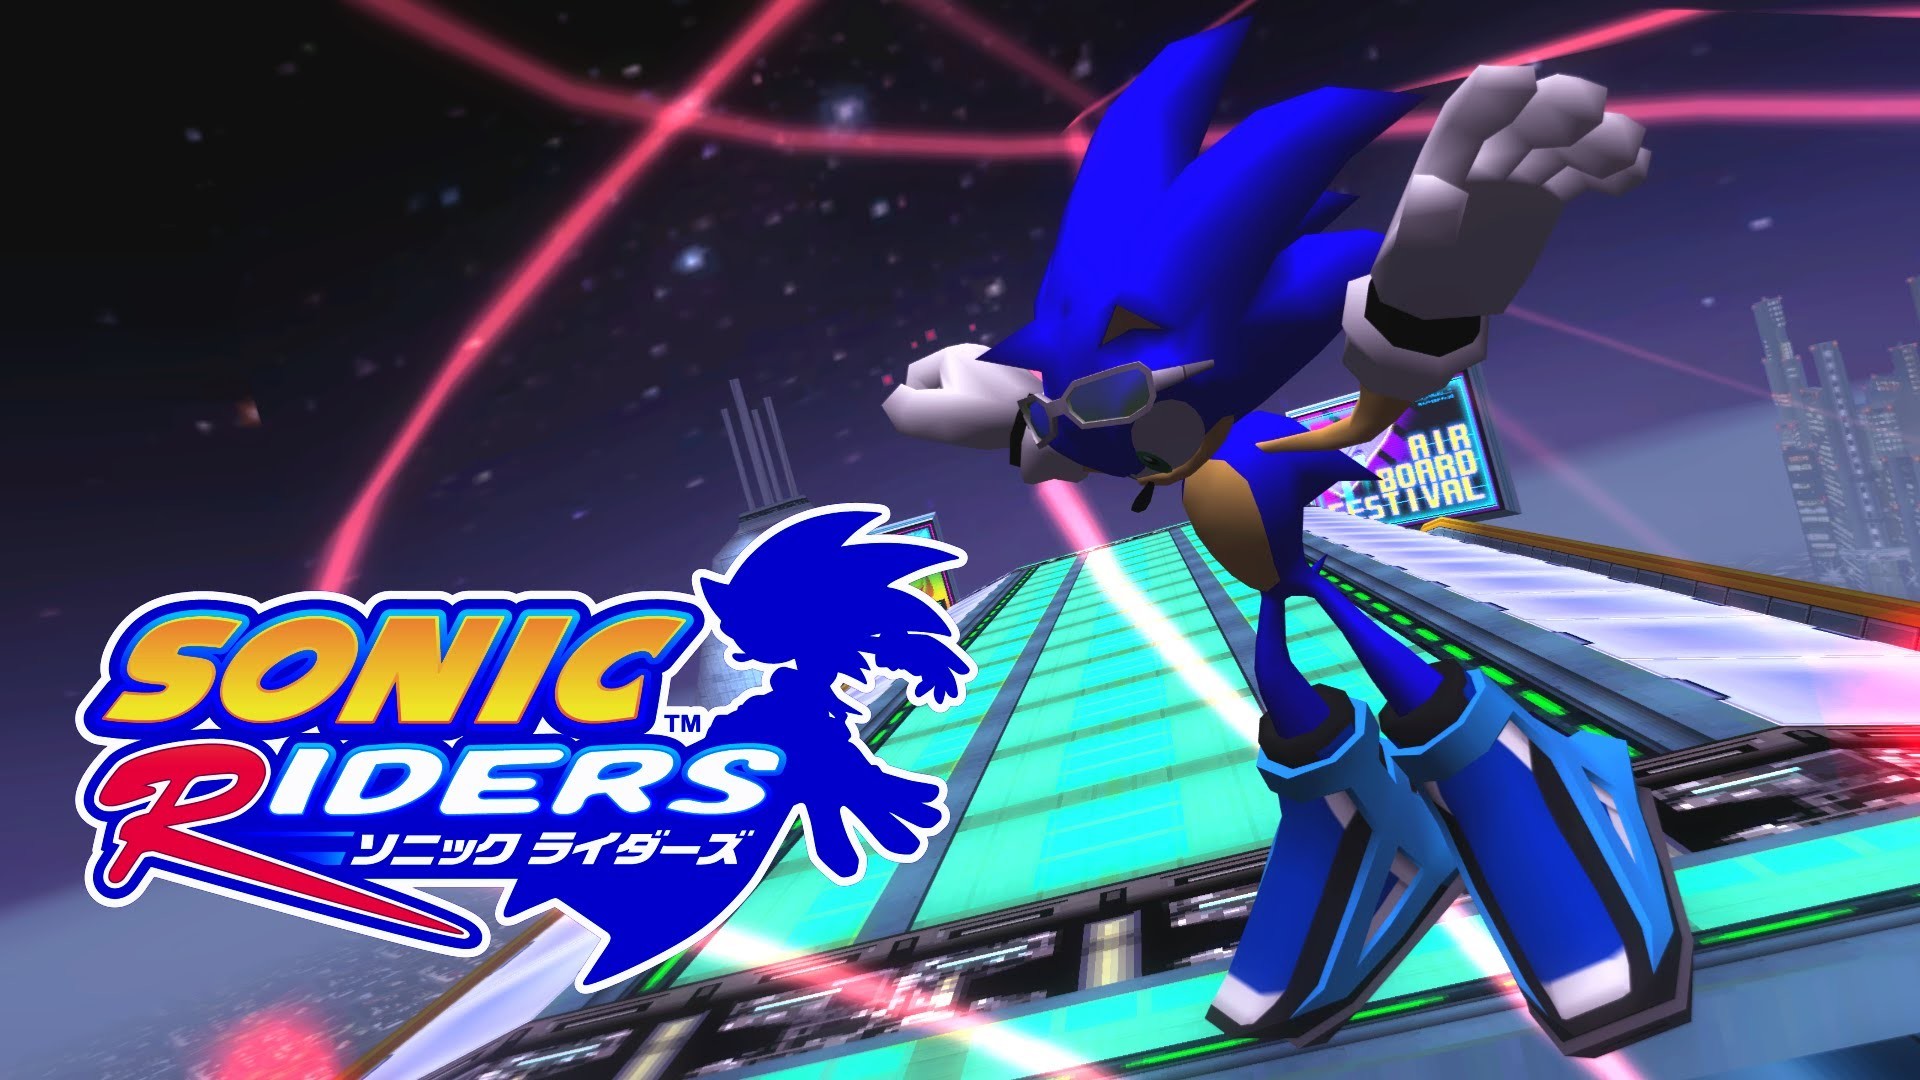 1920x1080 Sonic Riders - Night Chase - Sonic [REAL Full HD, Widescreen] 60 FPS